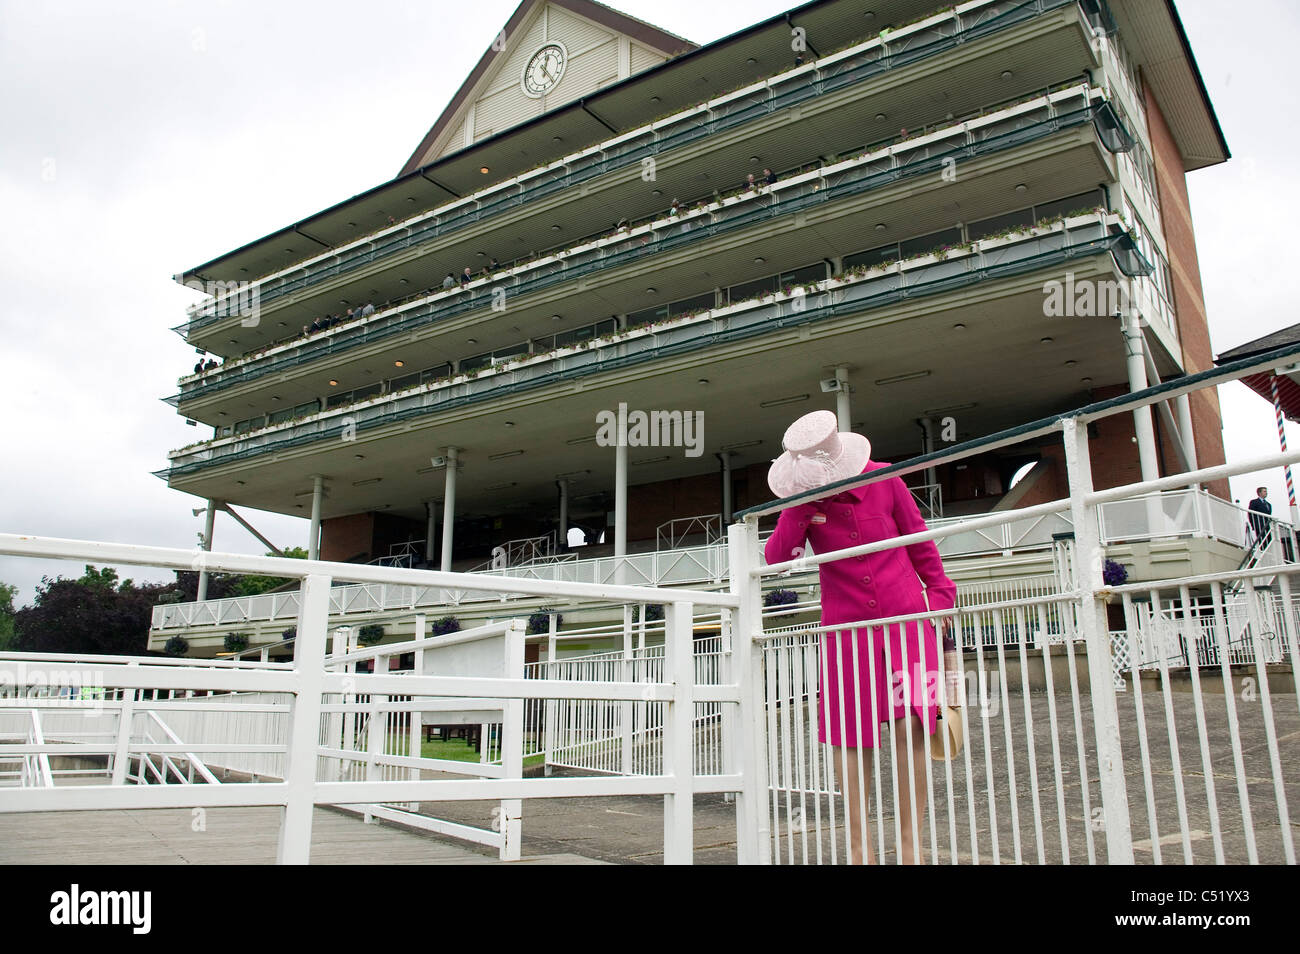 Race day for Royal Ascot when it was located at York during the refurbishment of the Ascot racecourse. York. Stock Photo